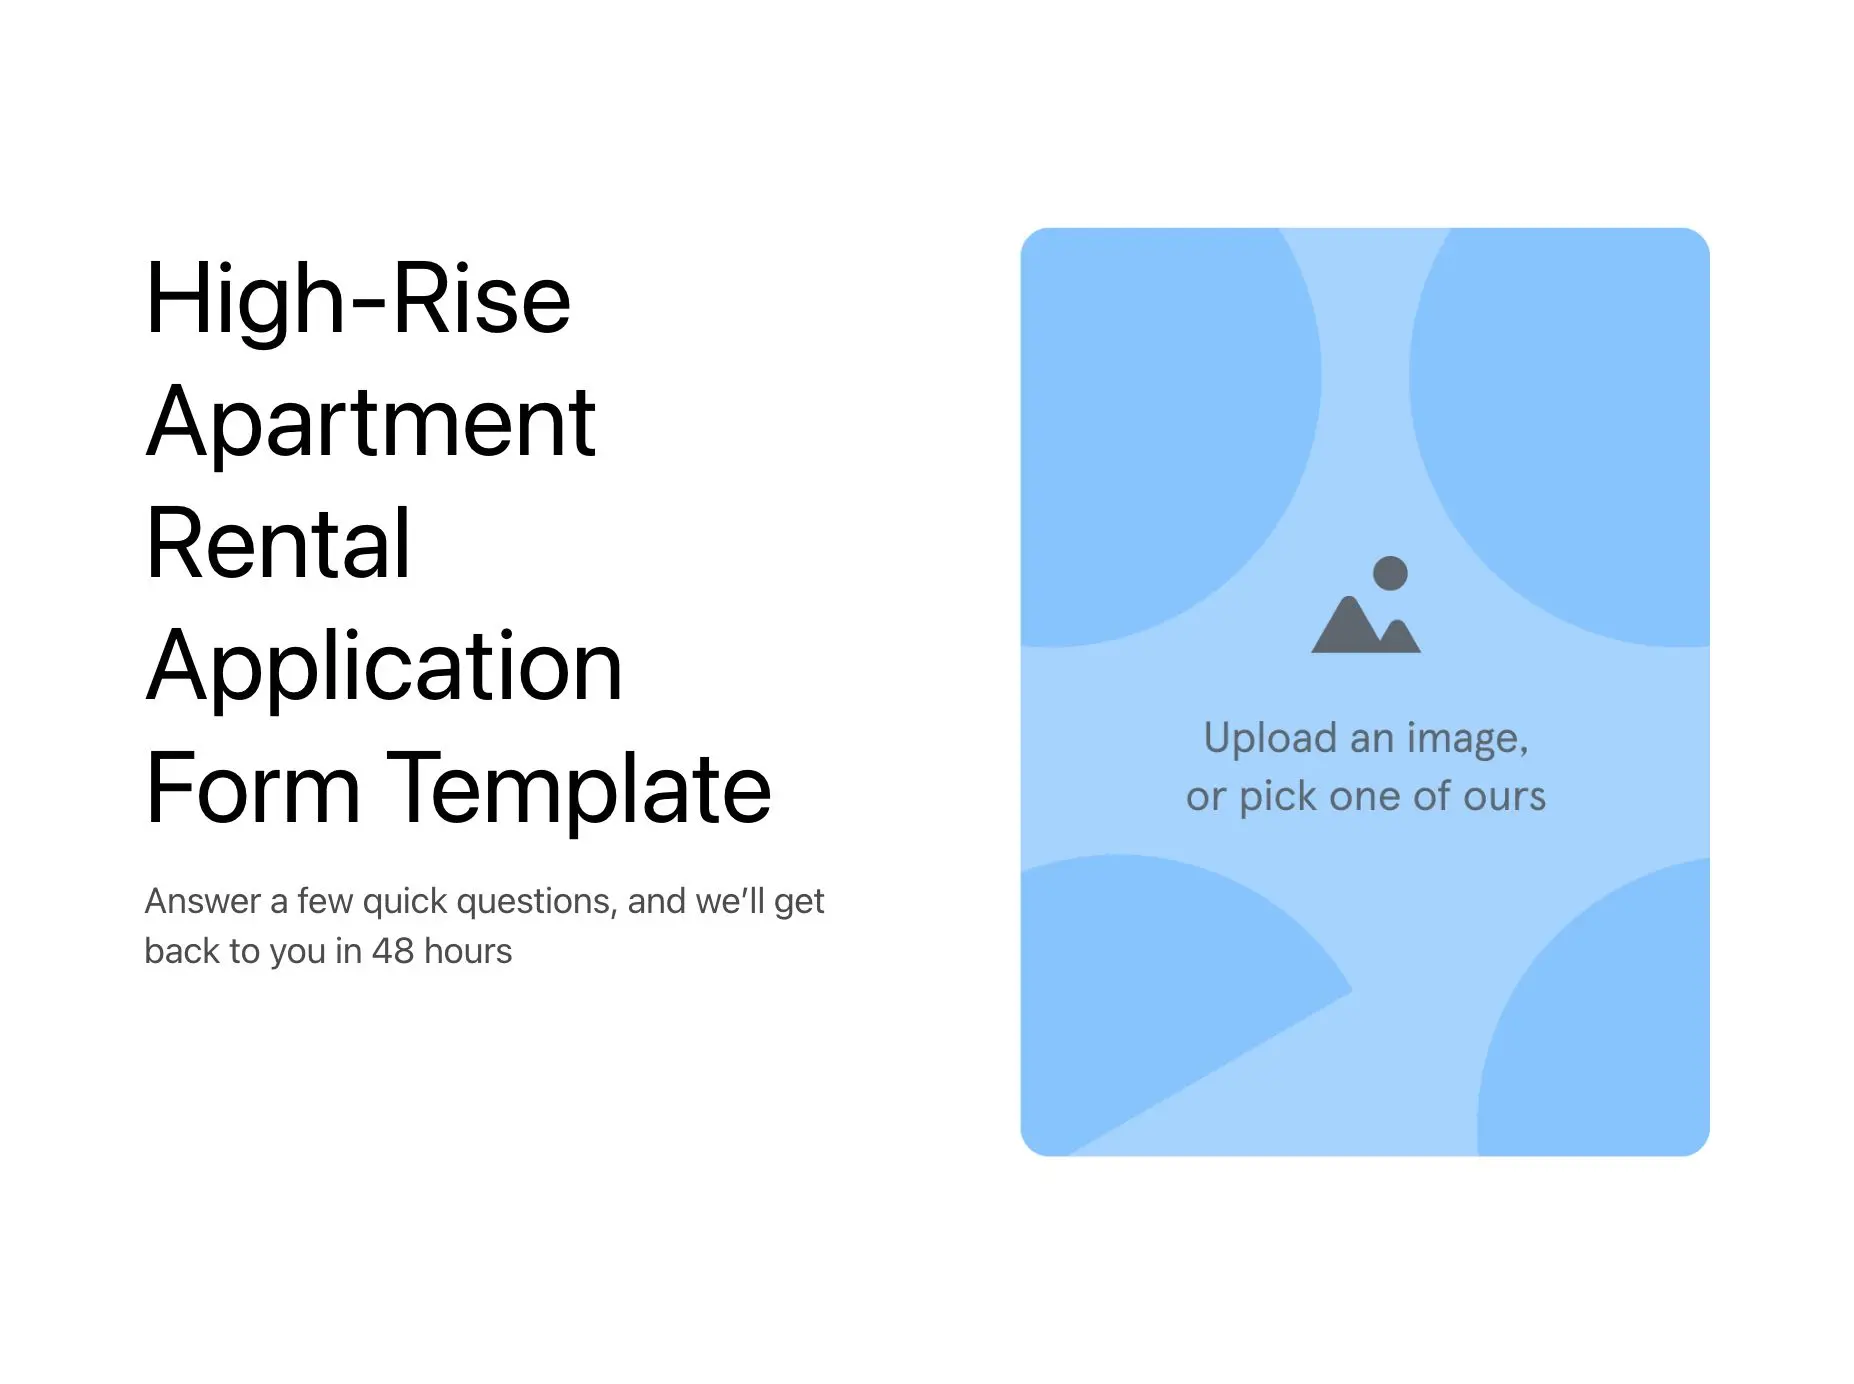 High-Rise Apartment Rental Application Form Template Hero